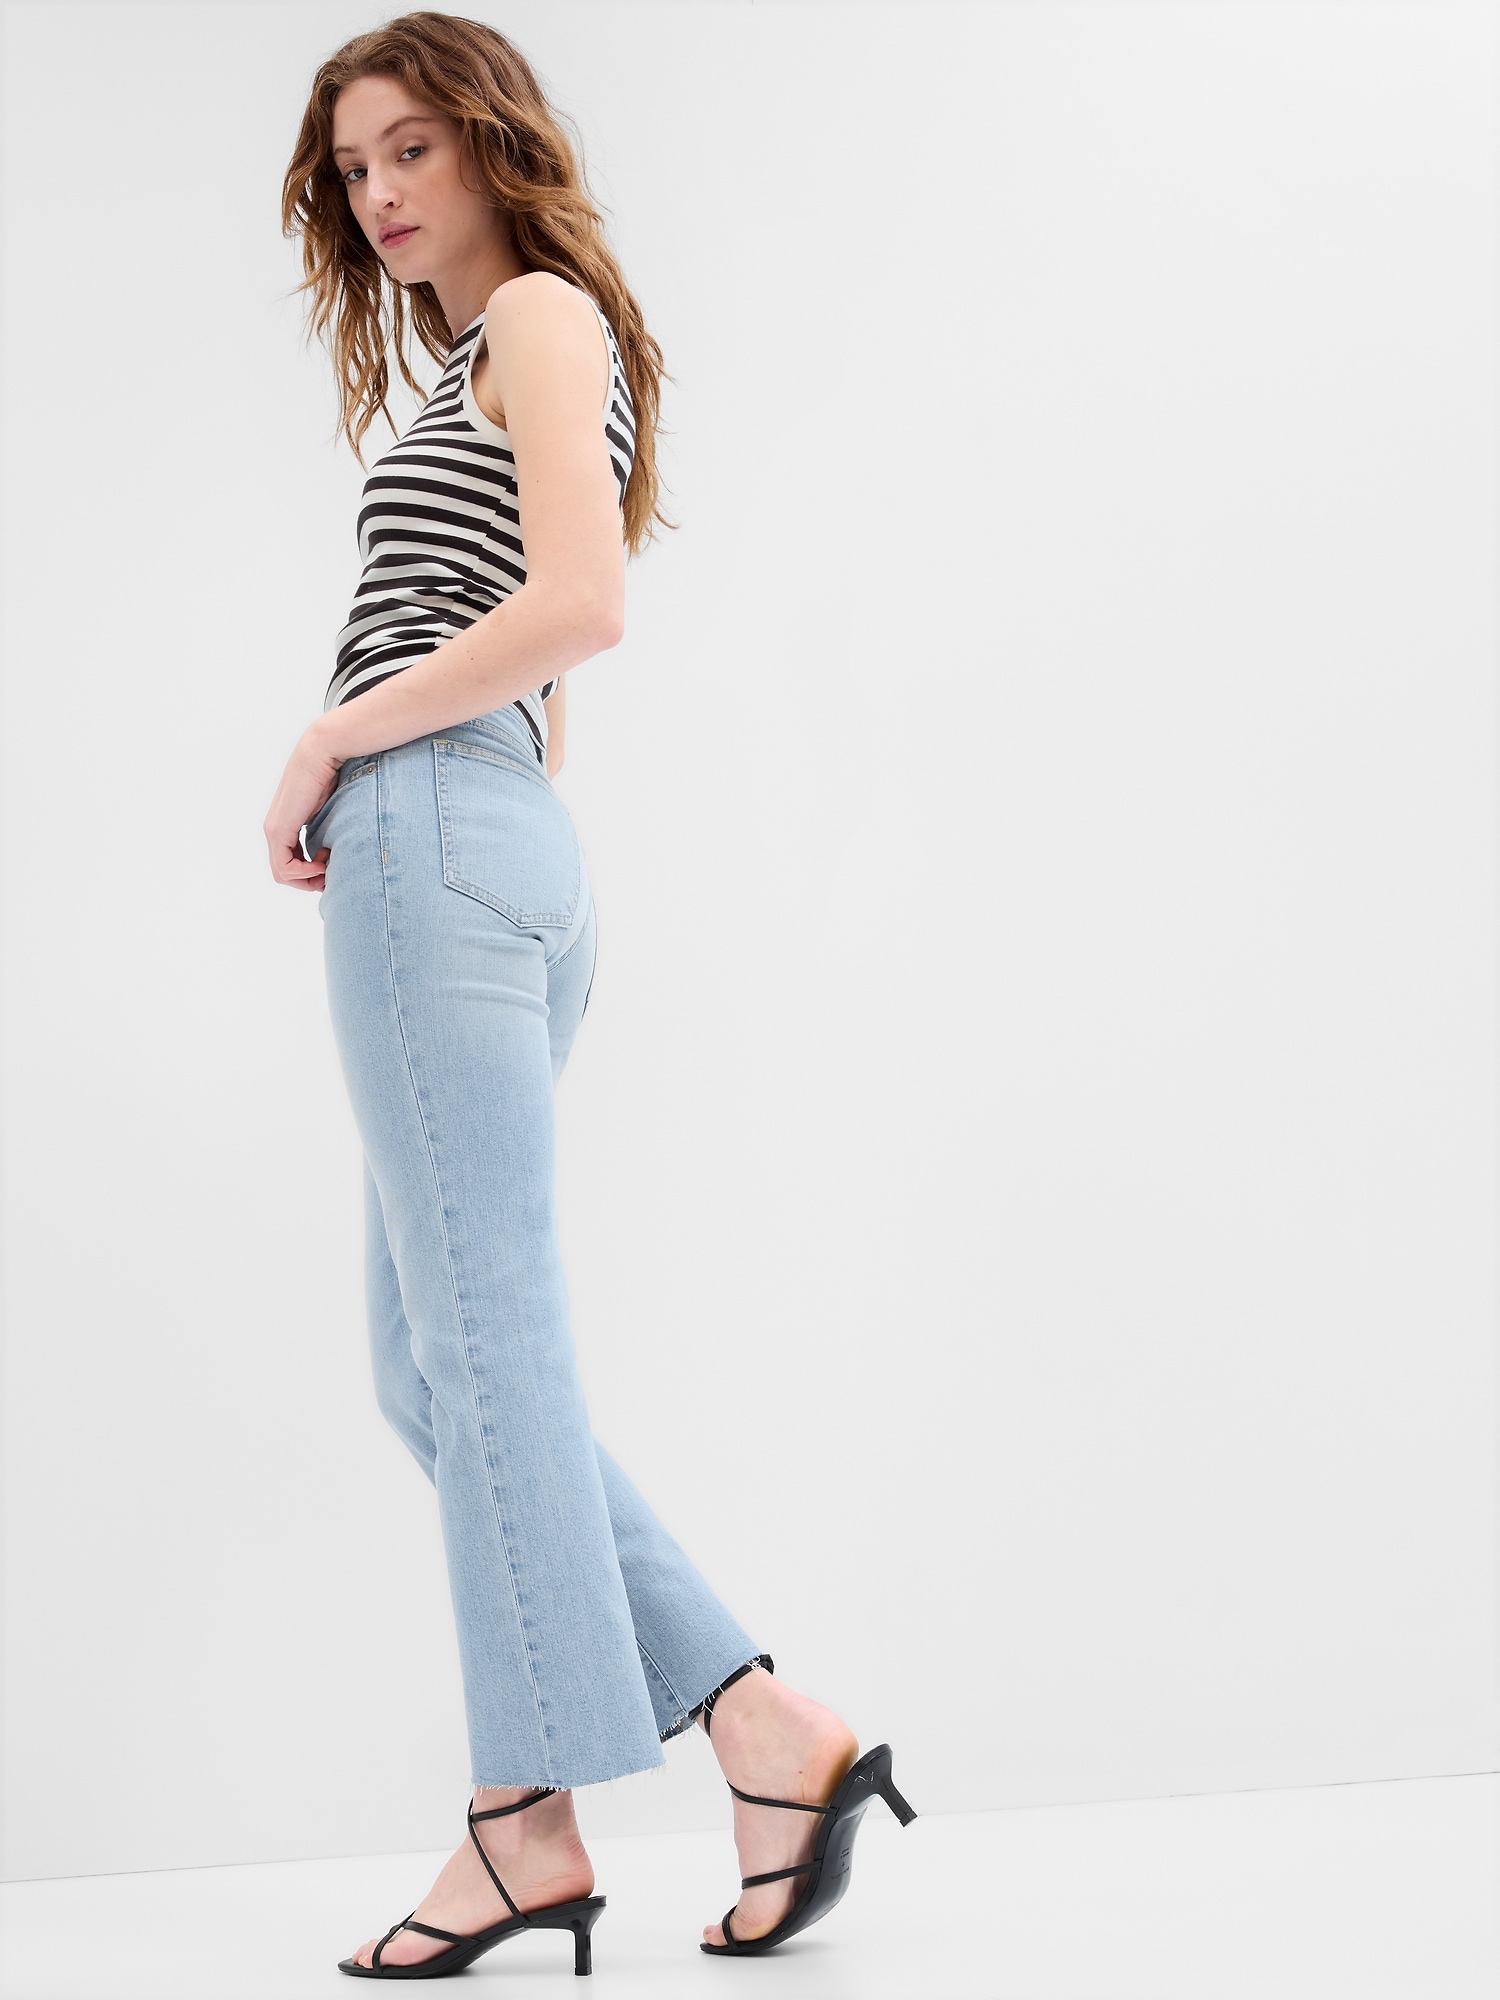 Mid Rise Kick Fit Jeans with Washwell | Gap Factory